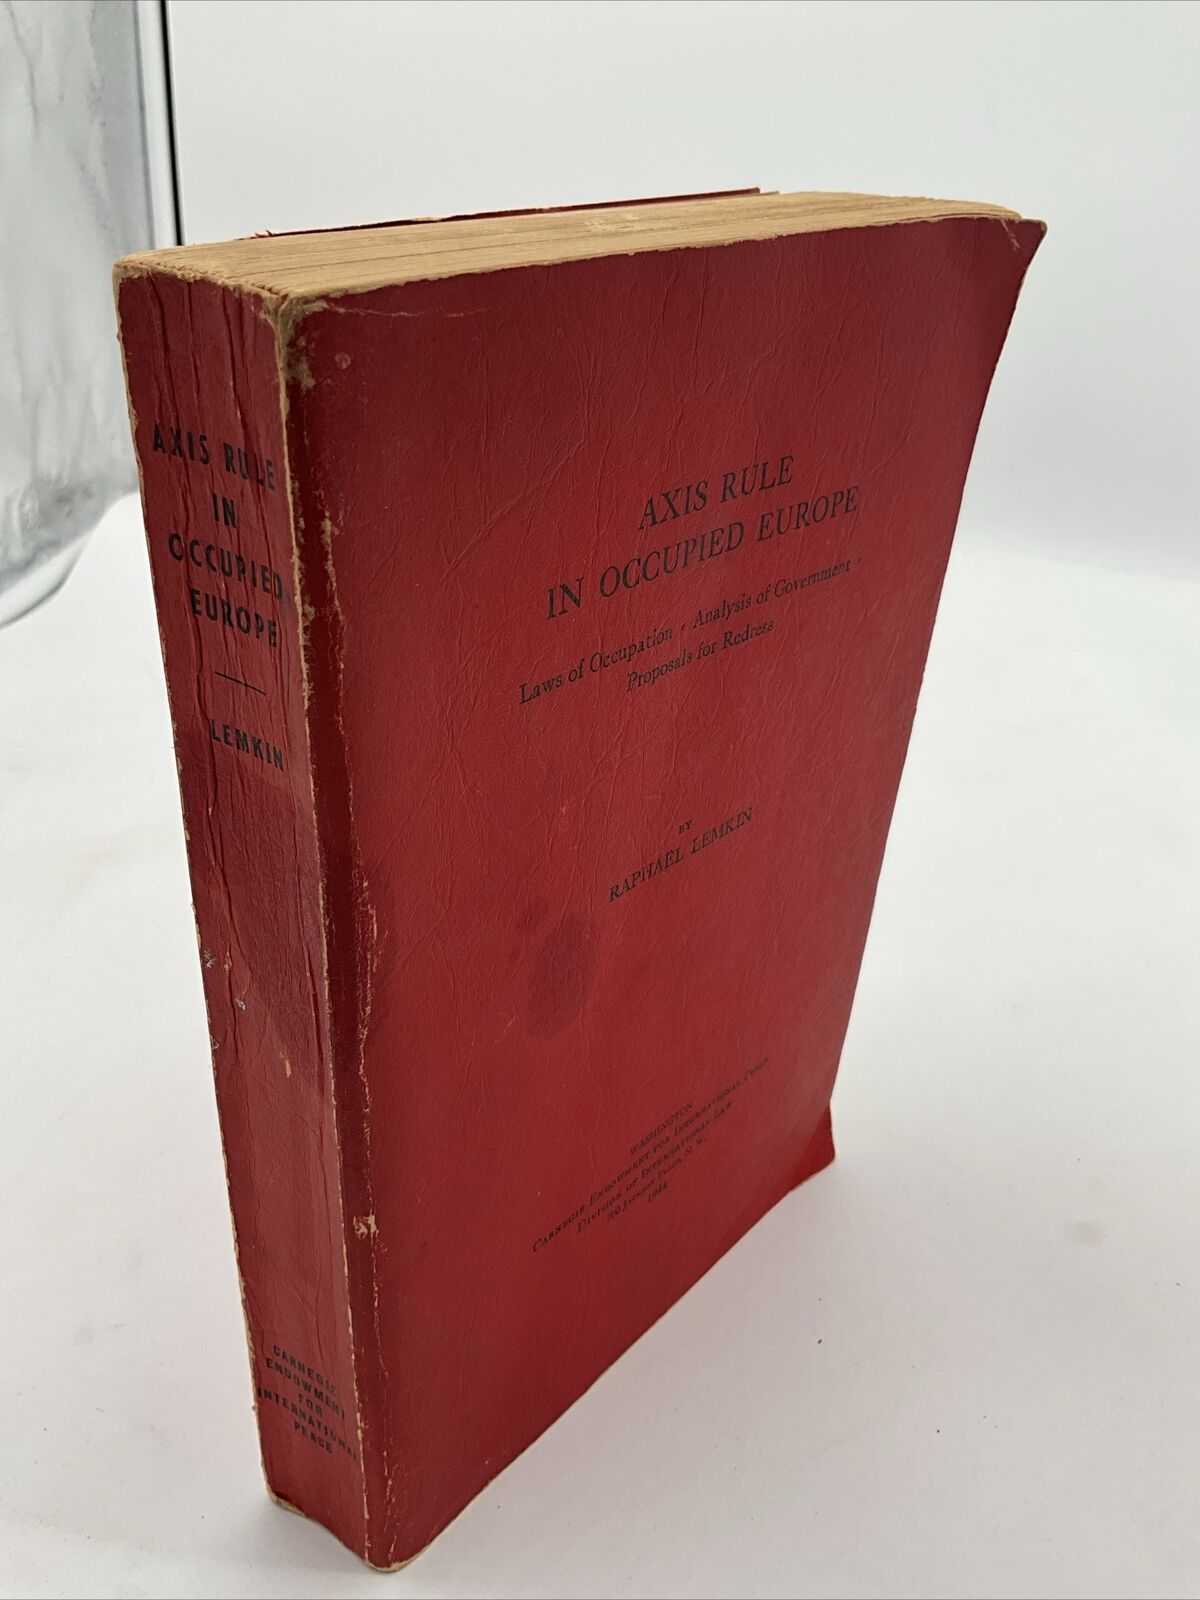 WWII Axis Rule in Occupied Europe 1944 by Raphael Lemkin First Edition Book